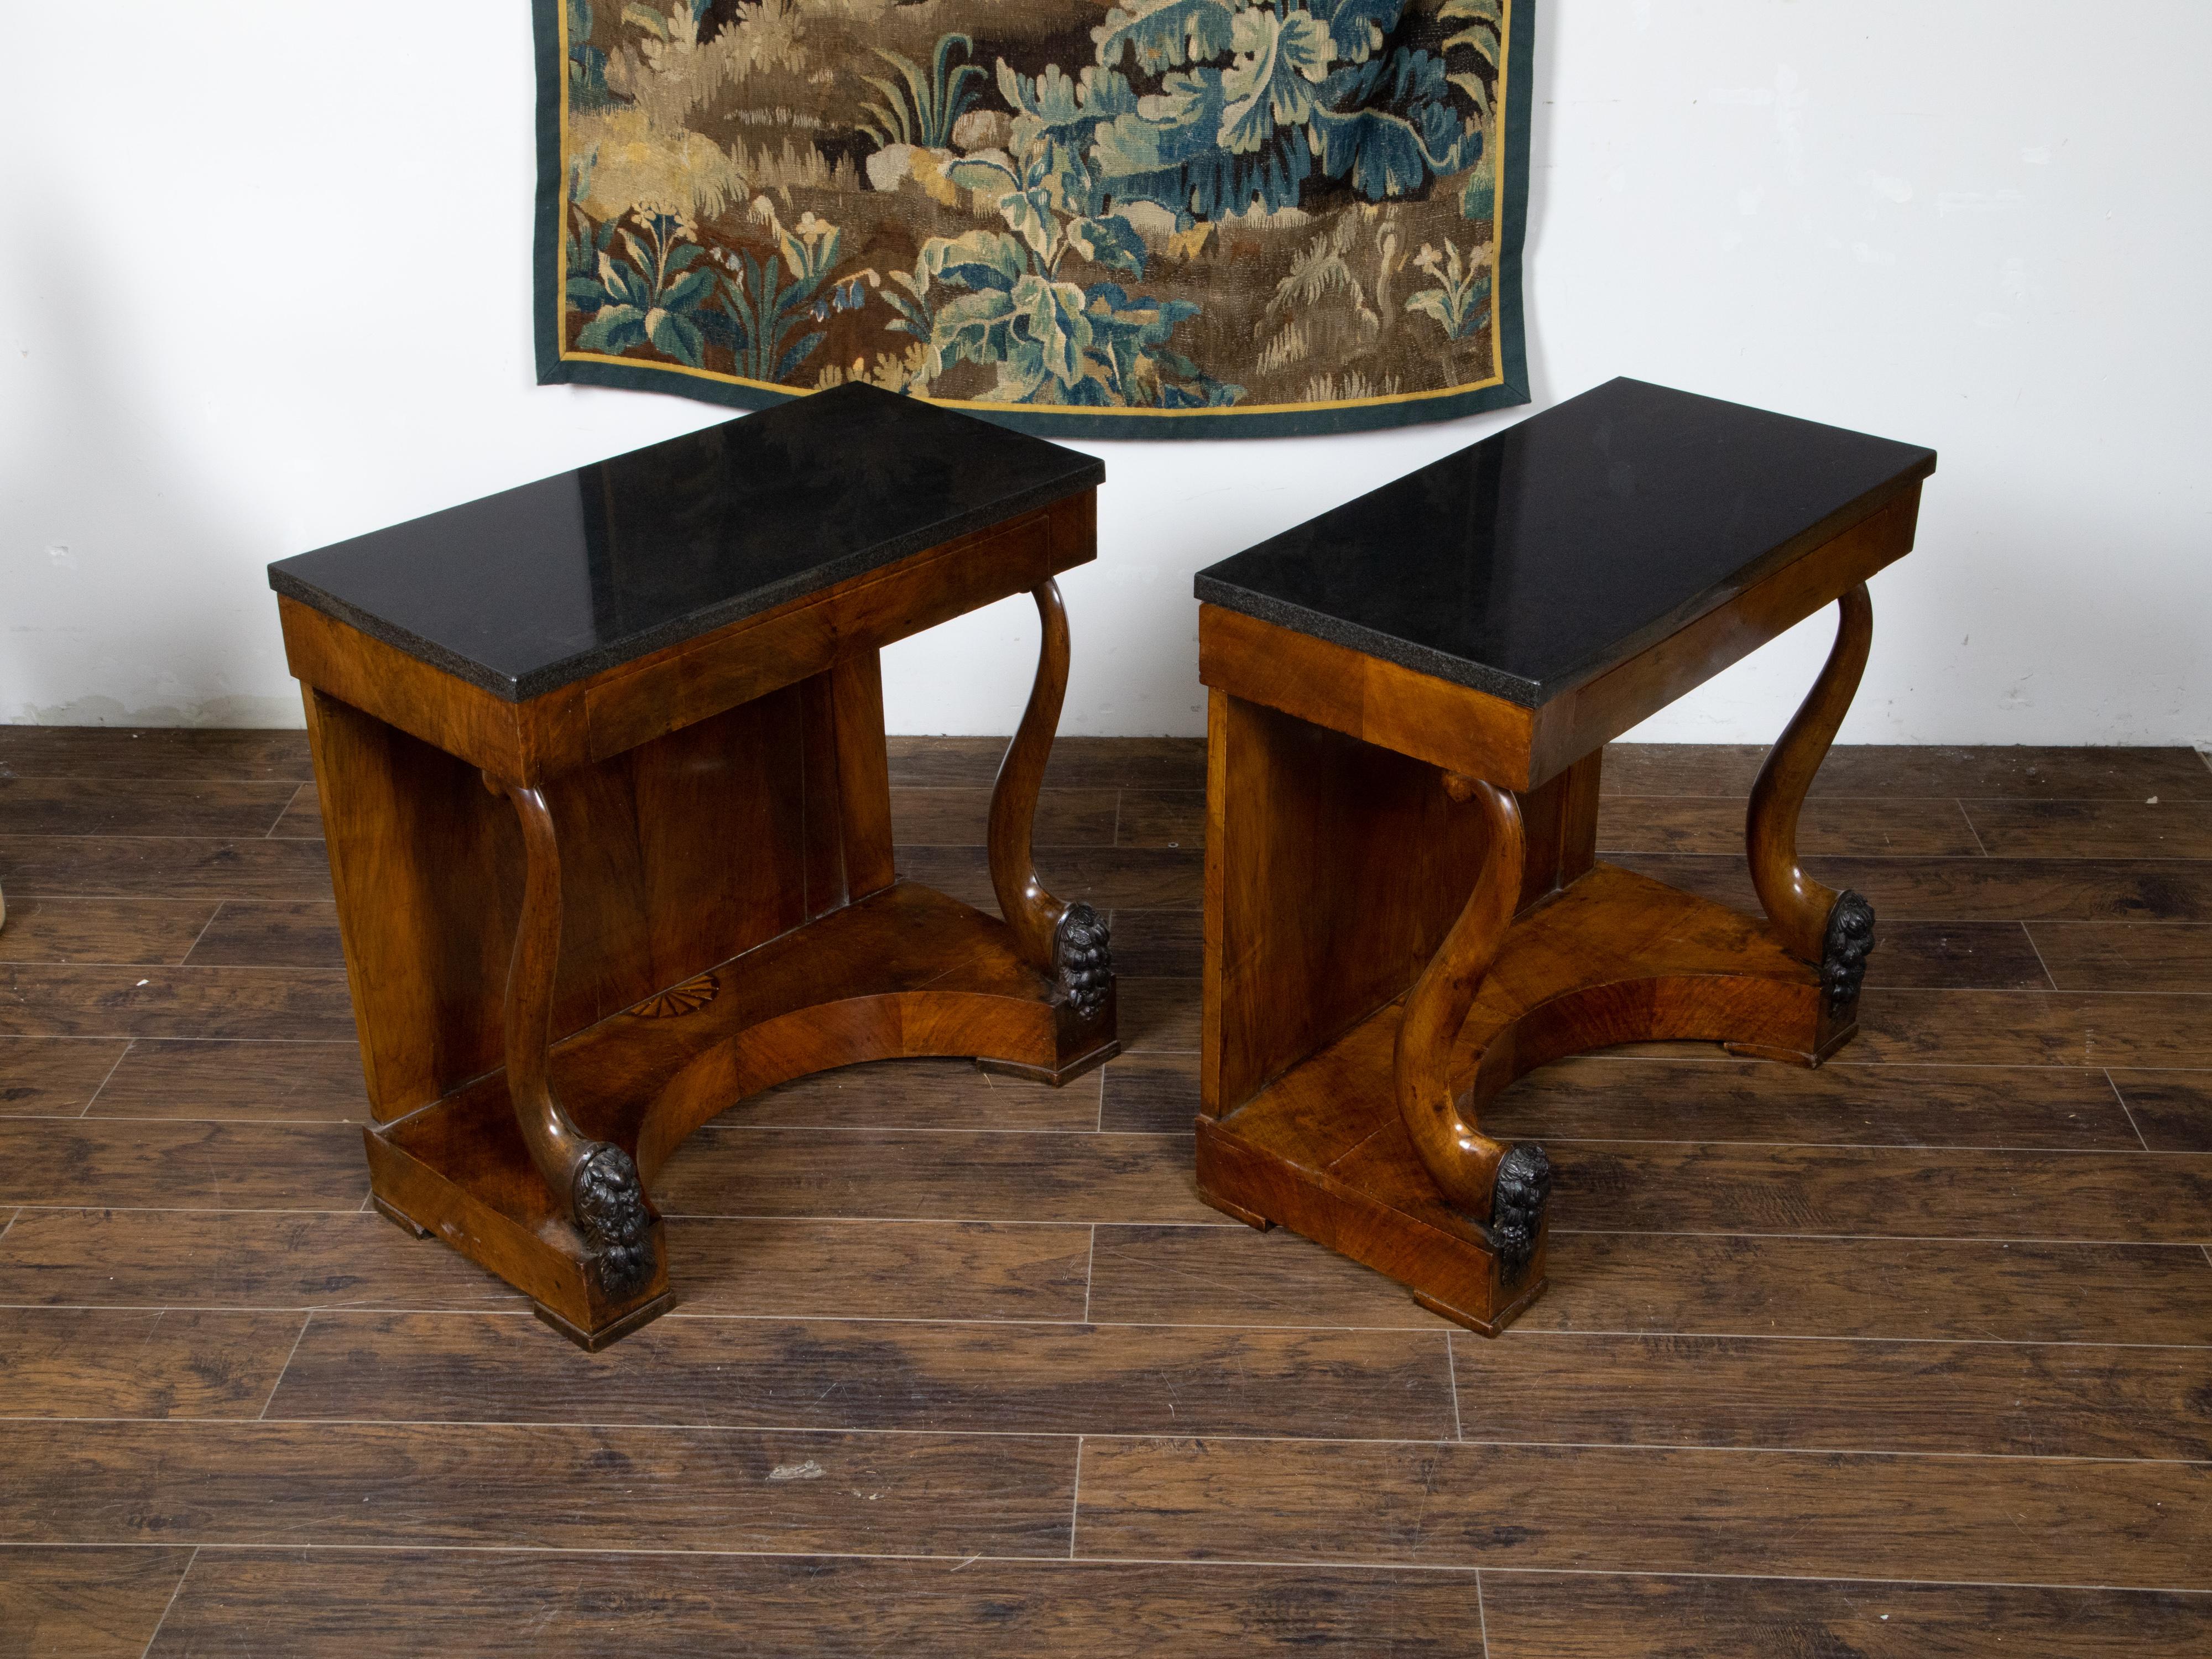 Pair of Austrian Biedermeier Period 19th Century Walnut and Marble Consoles For Sale 4